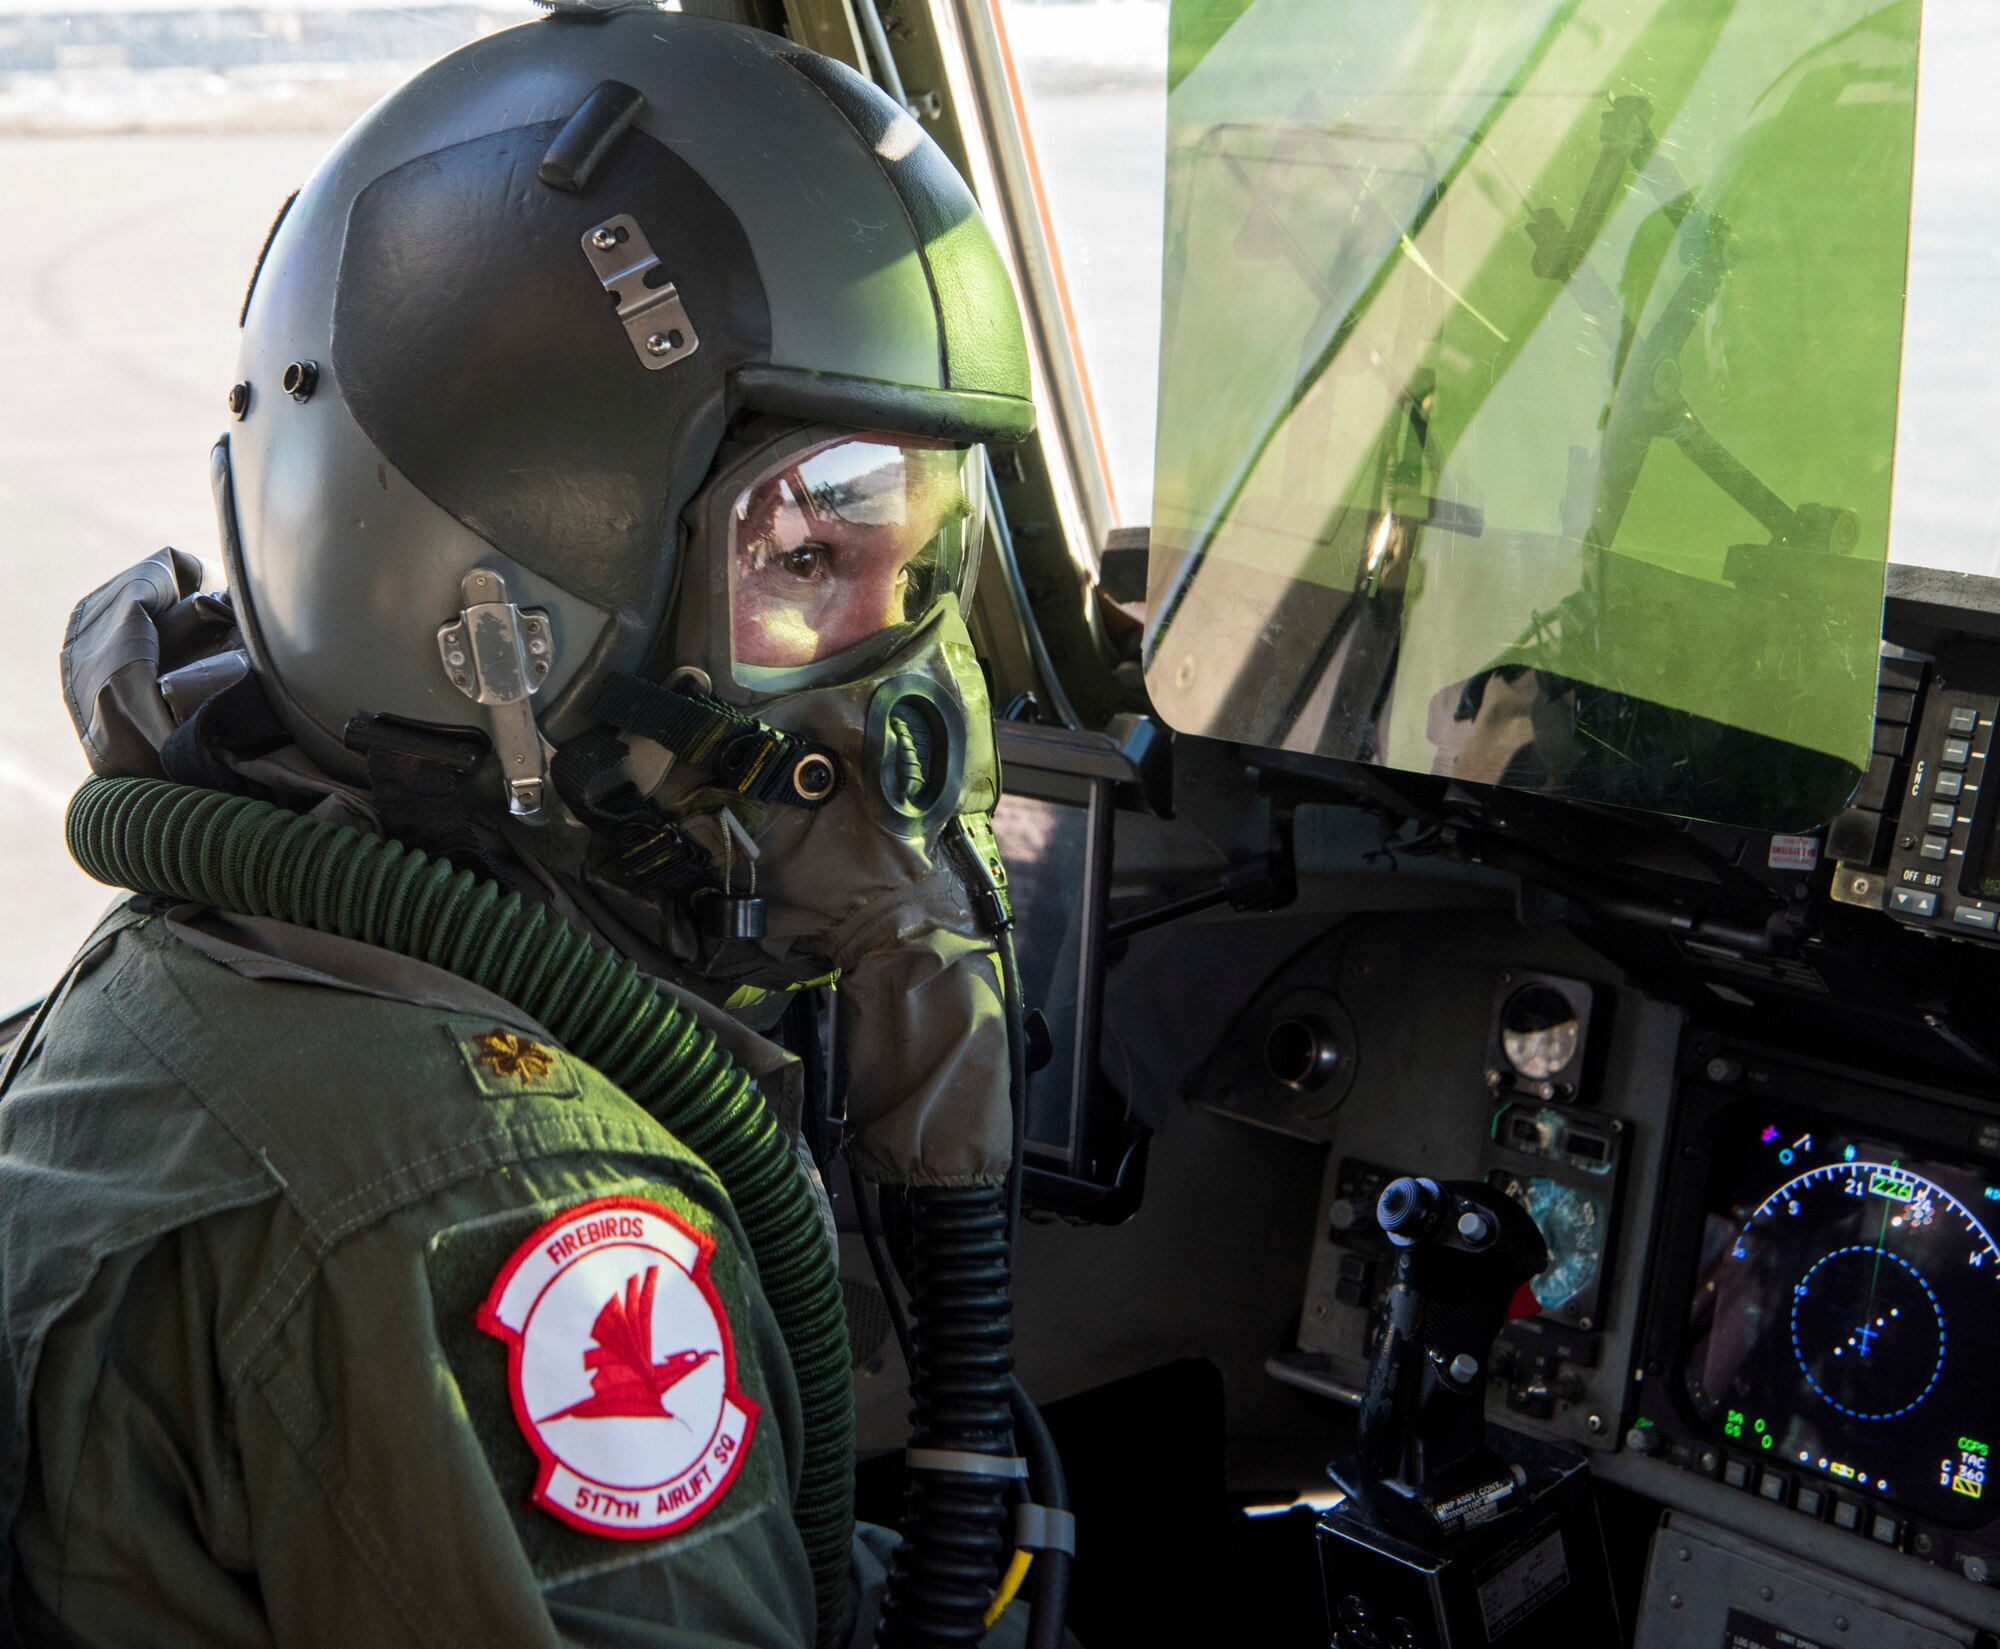 U.S. Air Force Maj. Trevor Williams, a 517th Airlift Squadron pilot, prepares for a flight during Polar Force 19-4 at Joint Base Elmendorf-Richardson, Alaska, April 1, 2019. Polar Force is a two-week exercise designed to test JBER’s mission readiness, and develops the skills service members require to face adverse situations.